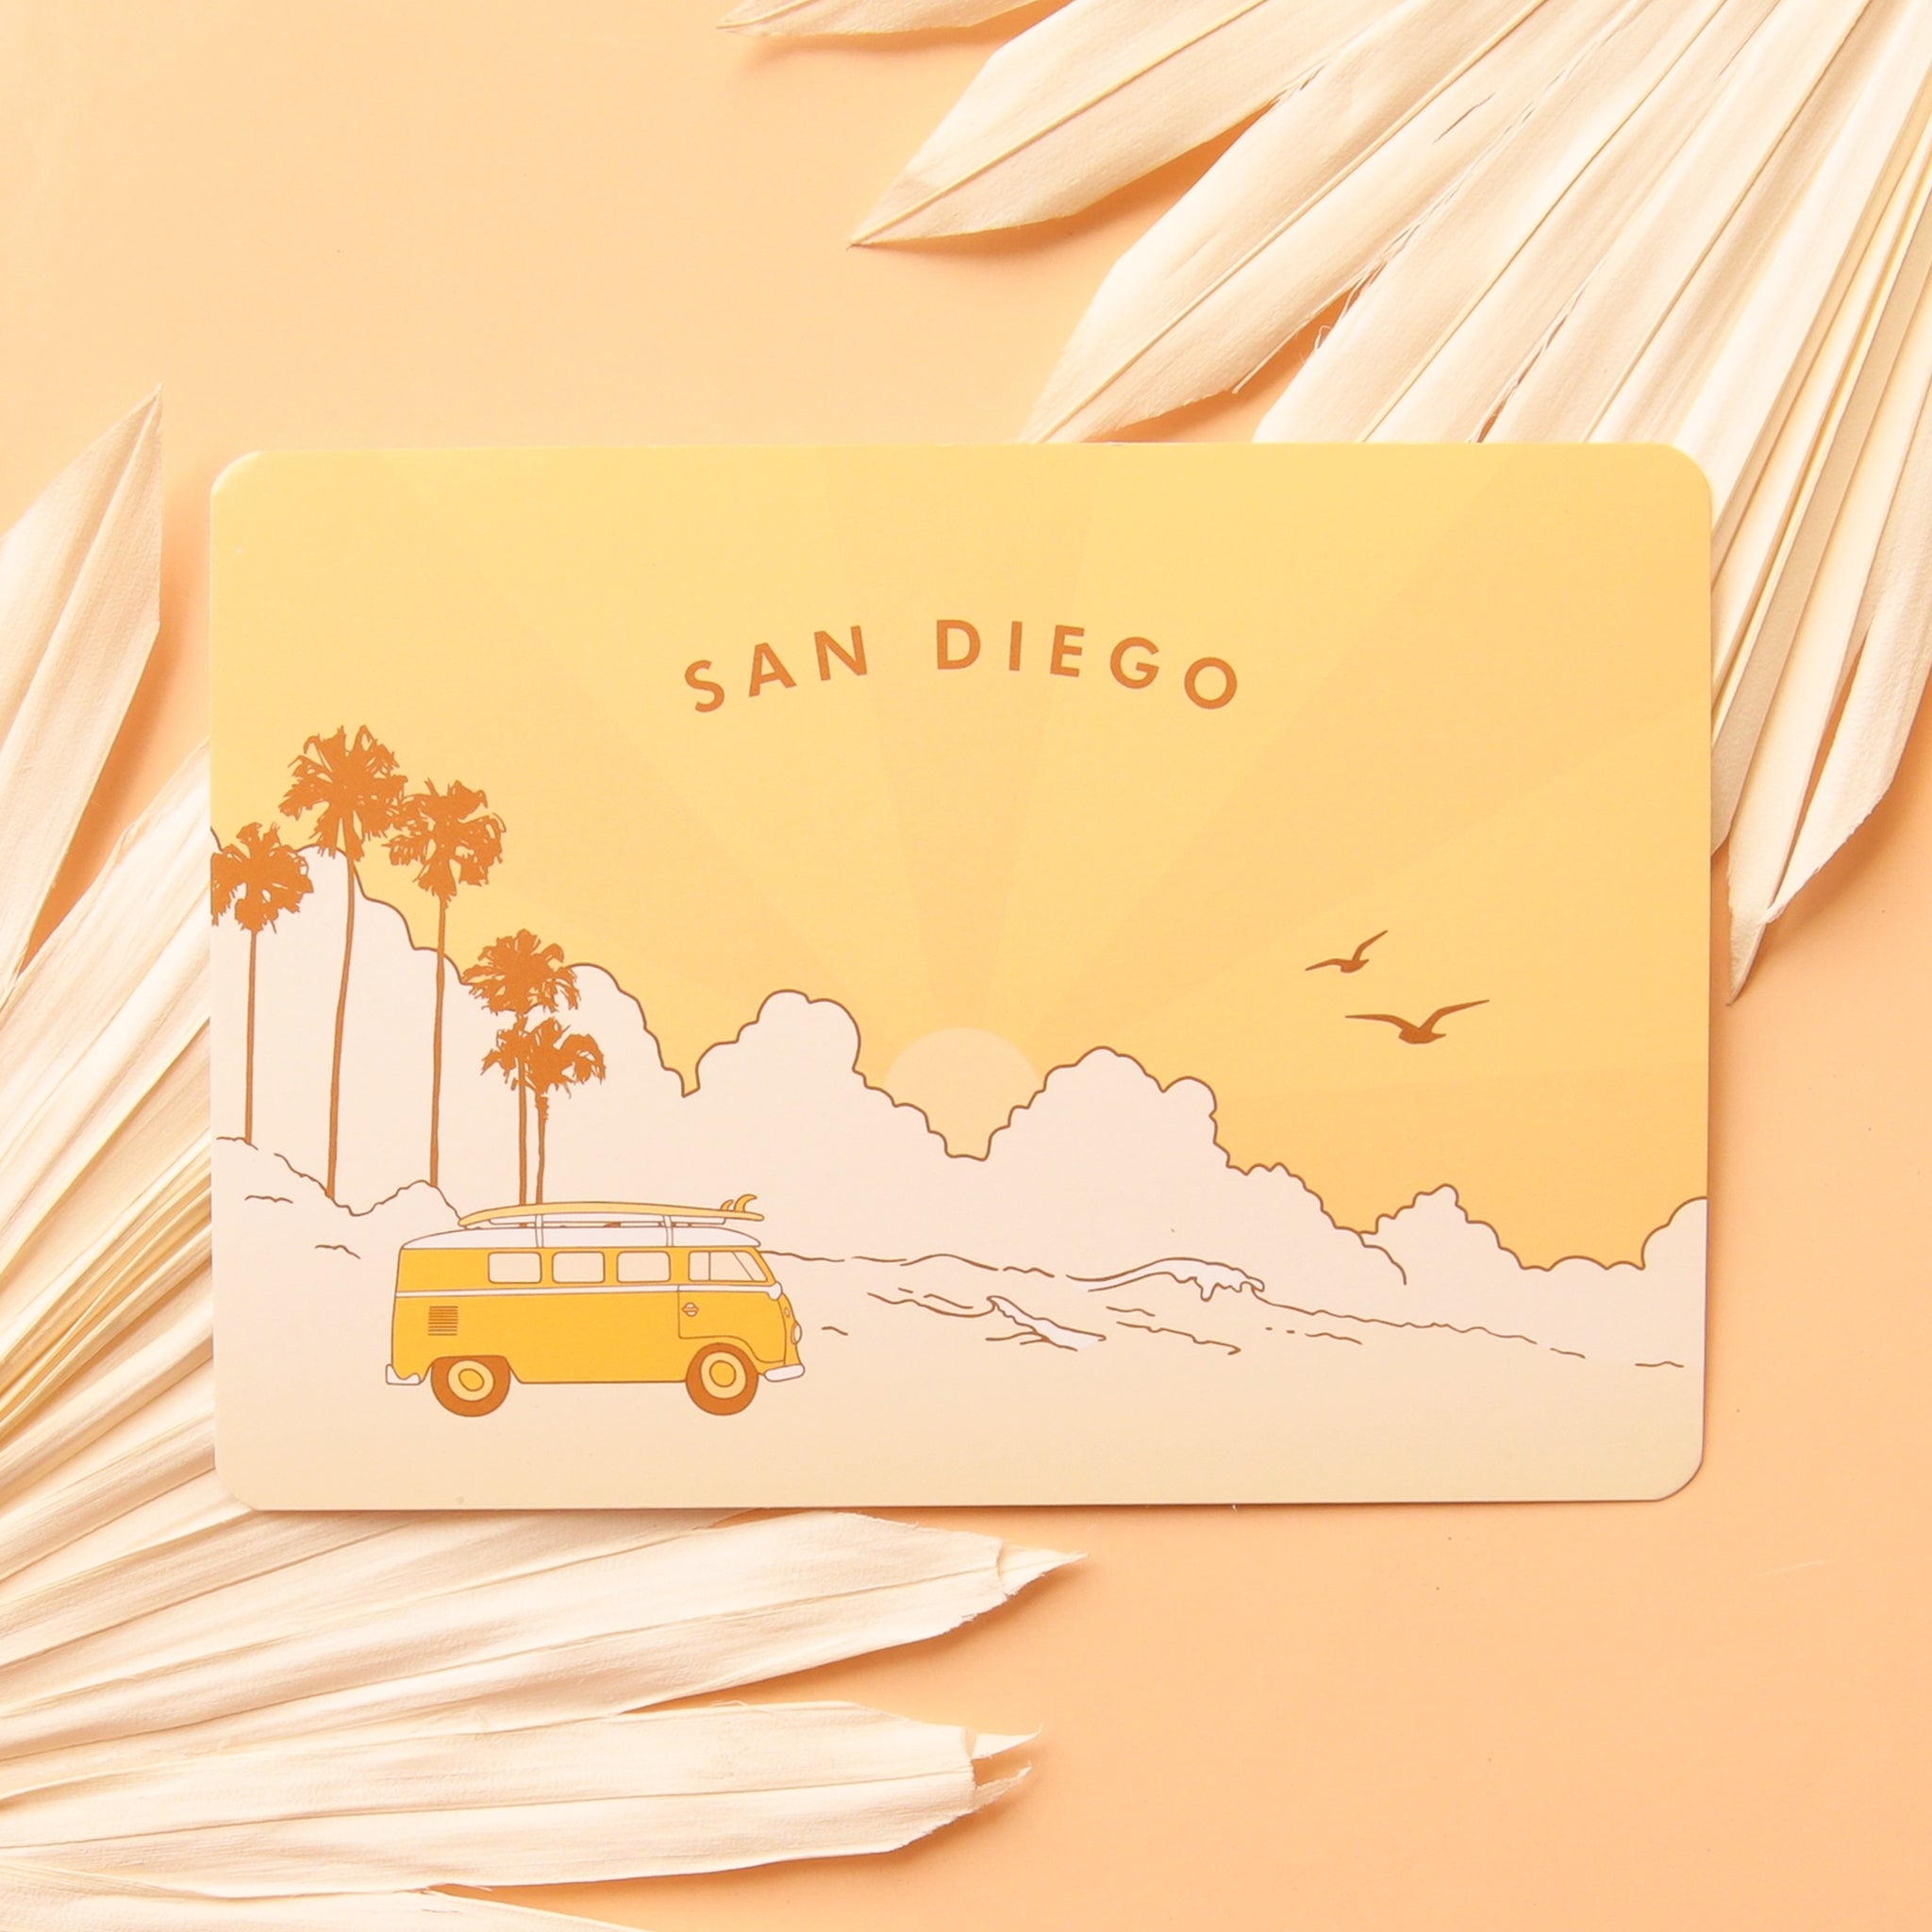 A yellow and cream postcard with a San Diego beach graphic design with palm trees and birds in the background along with a bright yellow VW bus that has a surf board on top as well as text curved along the top that reads, "San Diego".